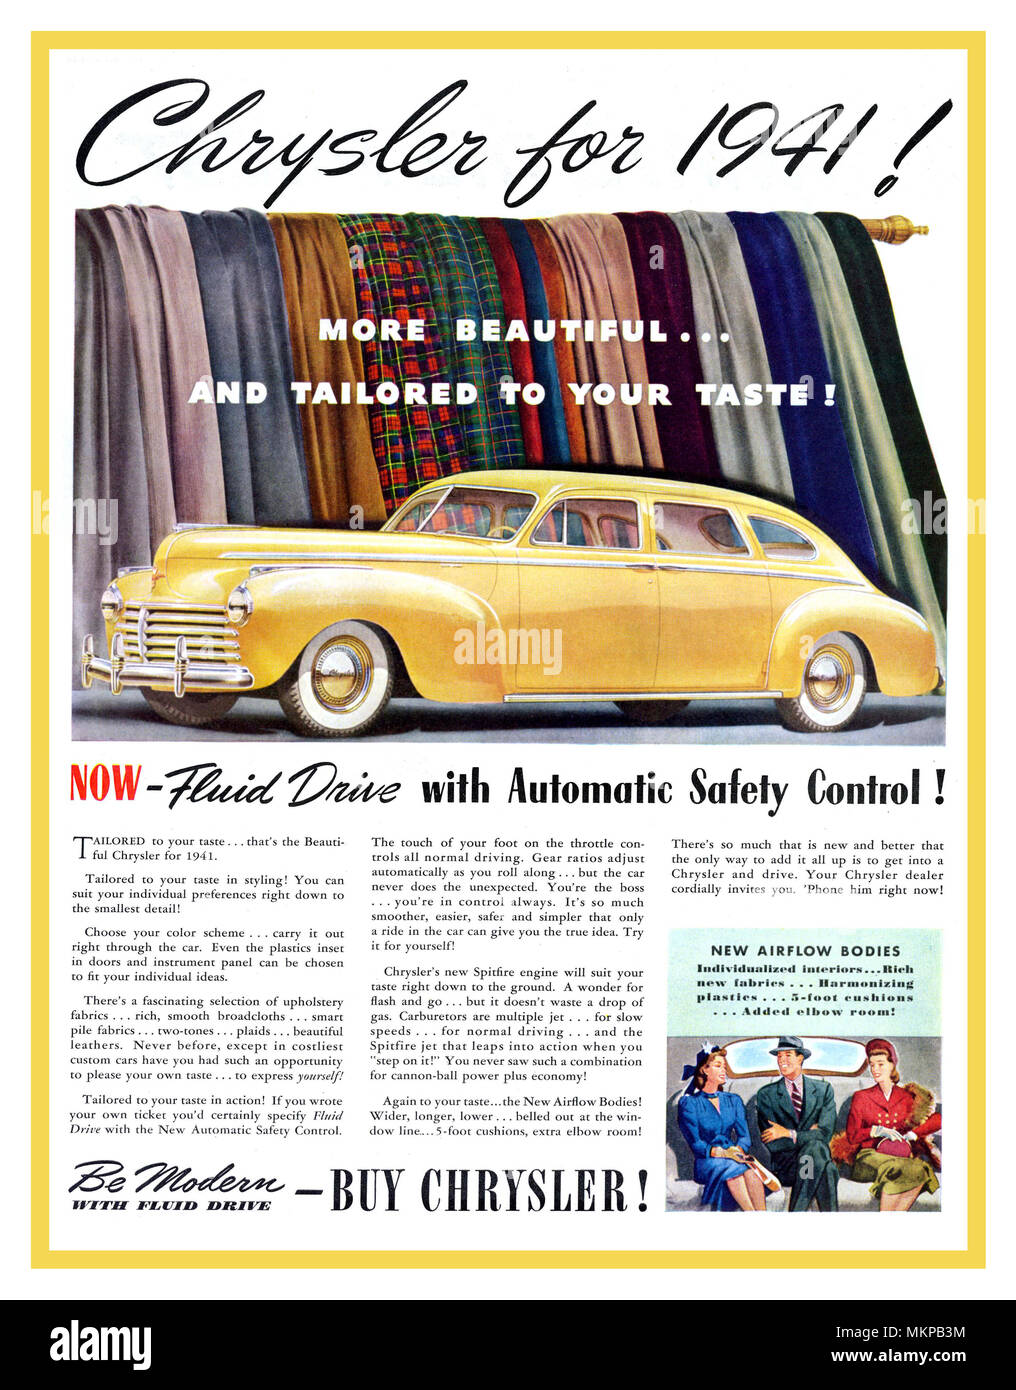 1941 American Chrysler Yellow Airflow 4 door Body Fluid Drive Cars - original press advertisement Manufactured in the year of the start to America's World War II Stock Photo